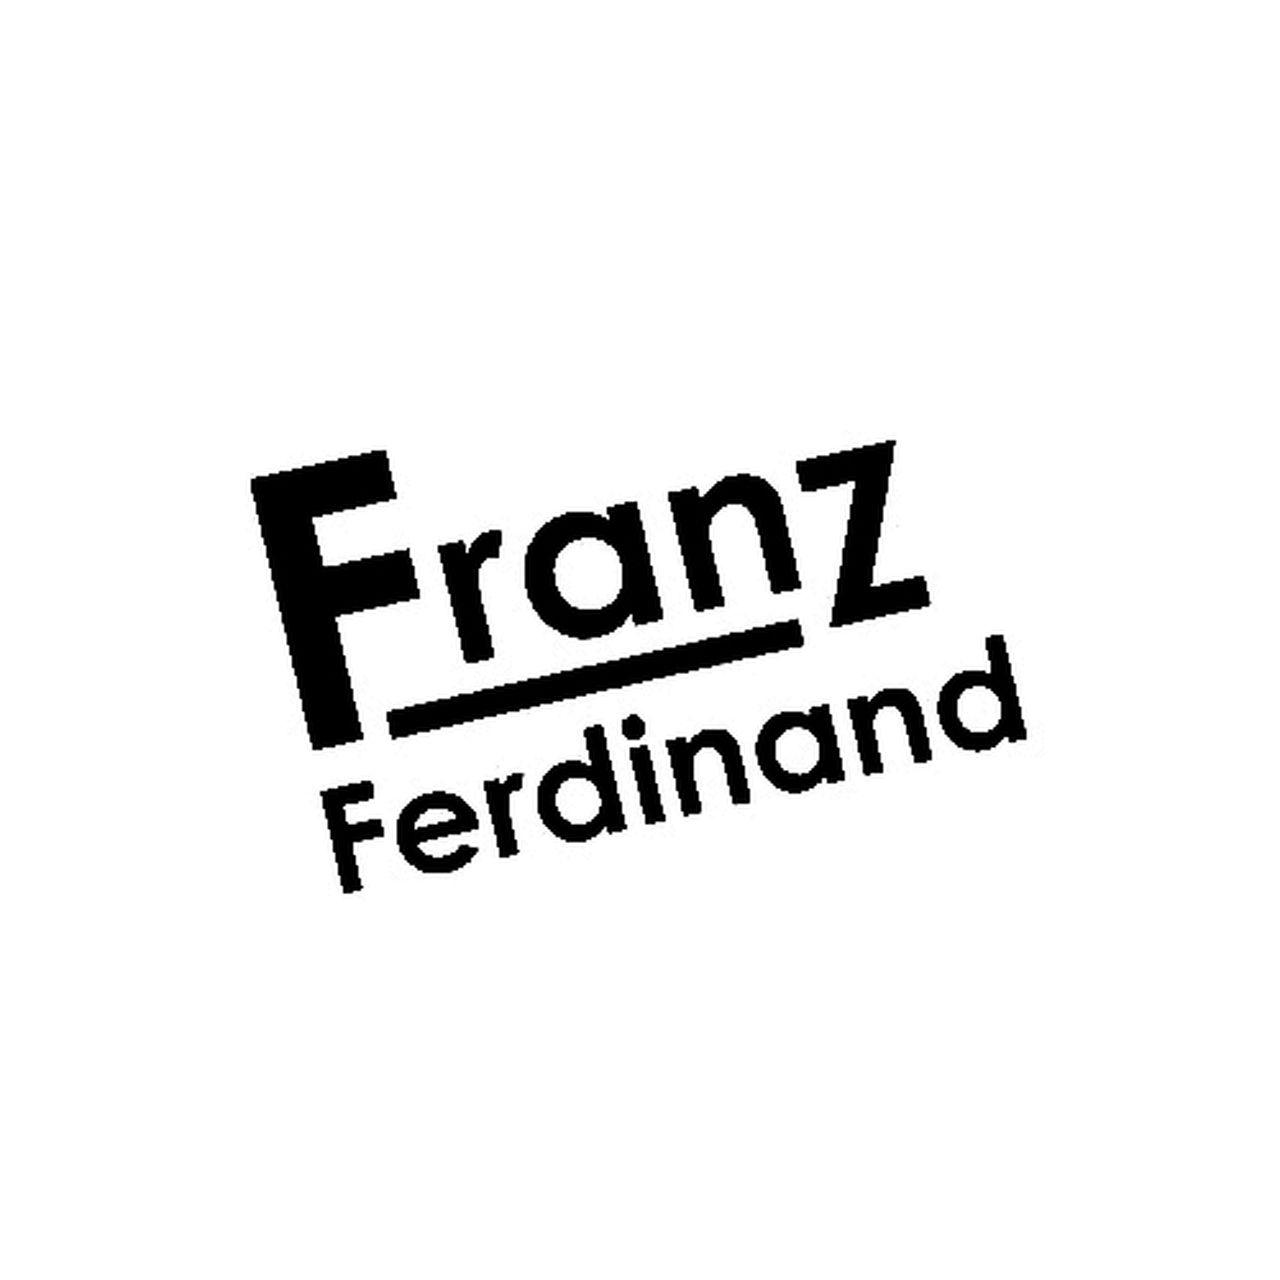 typography used in franz ferdinand band